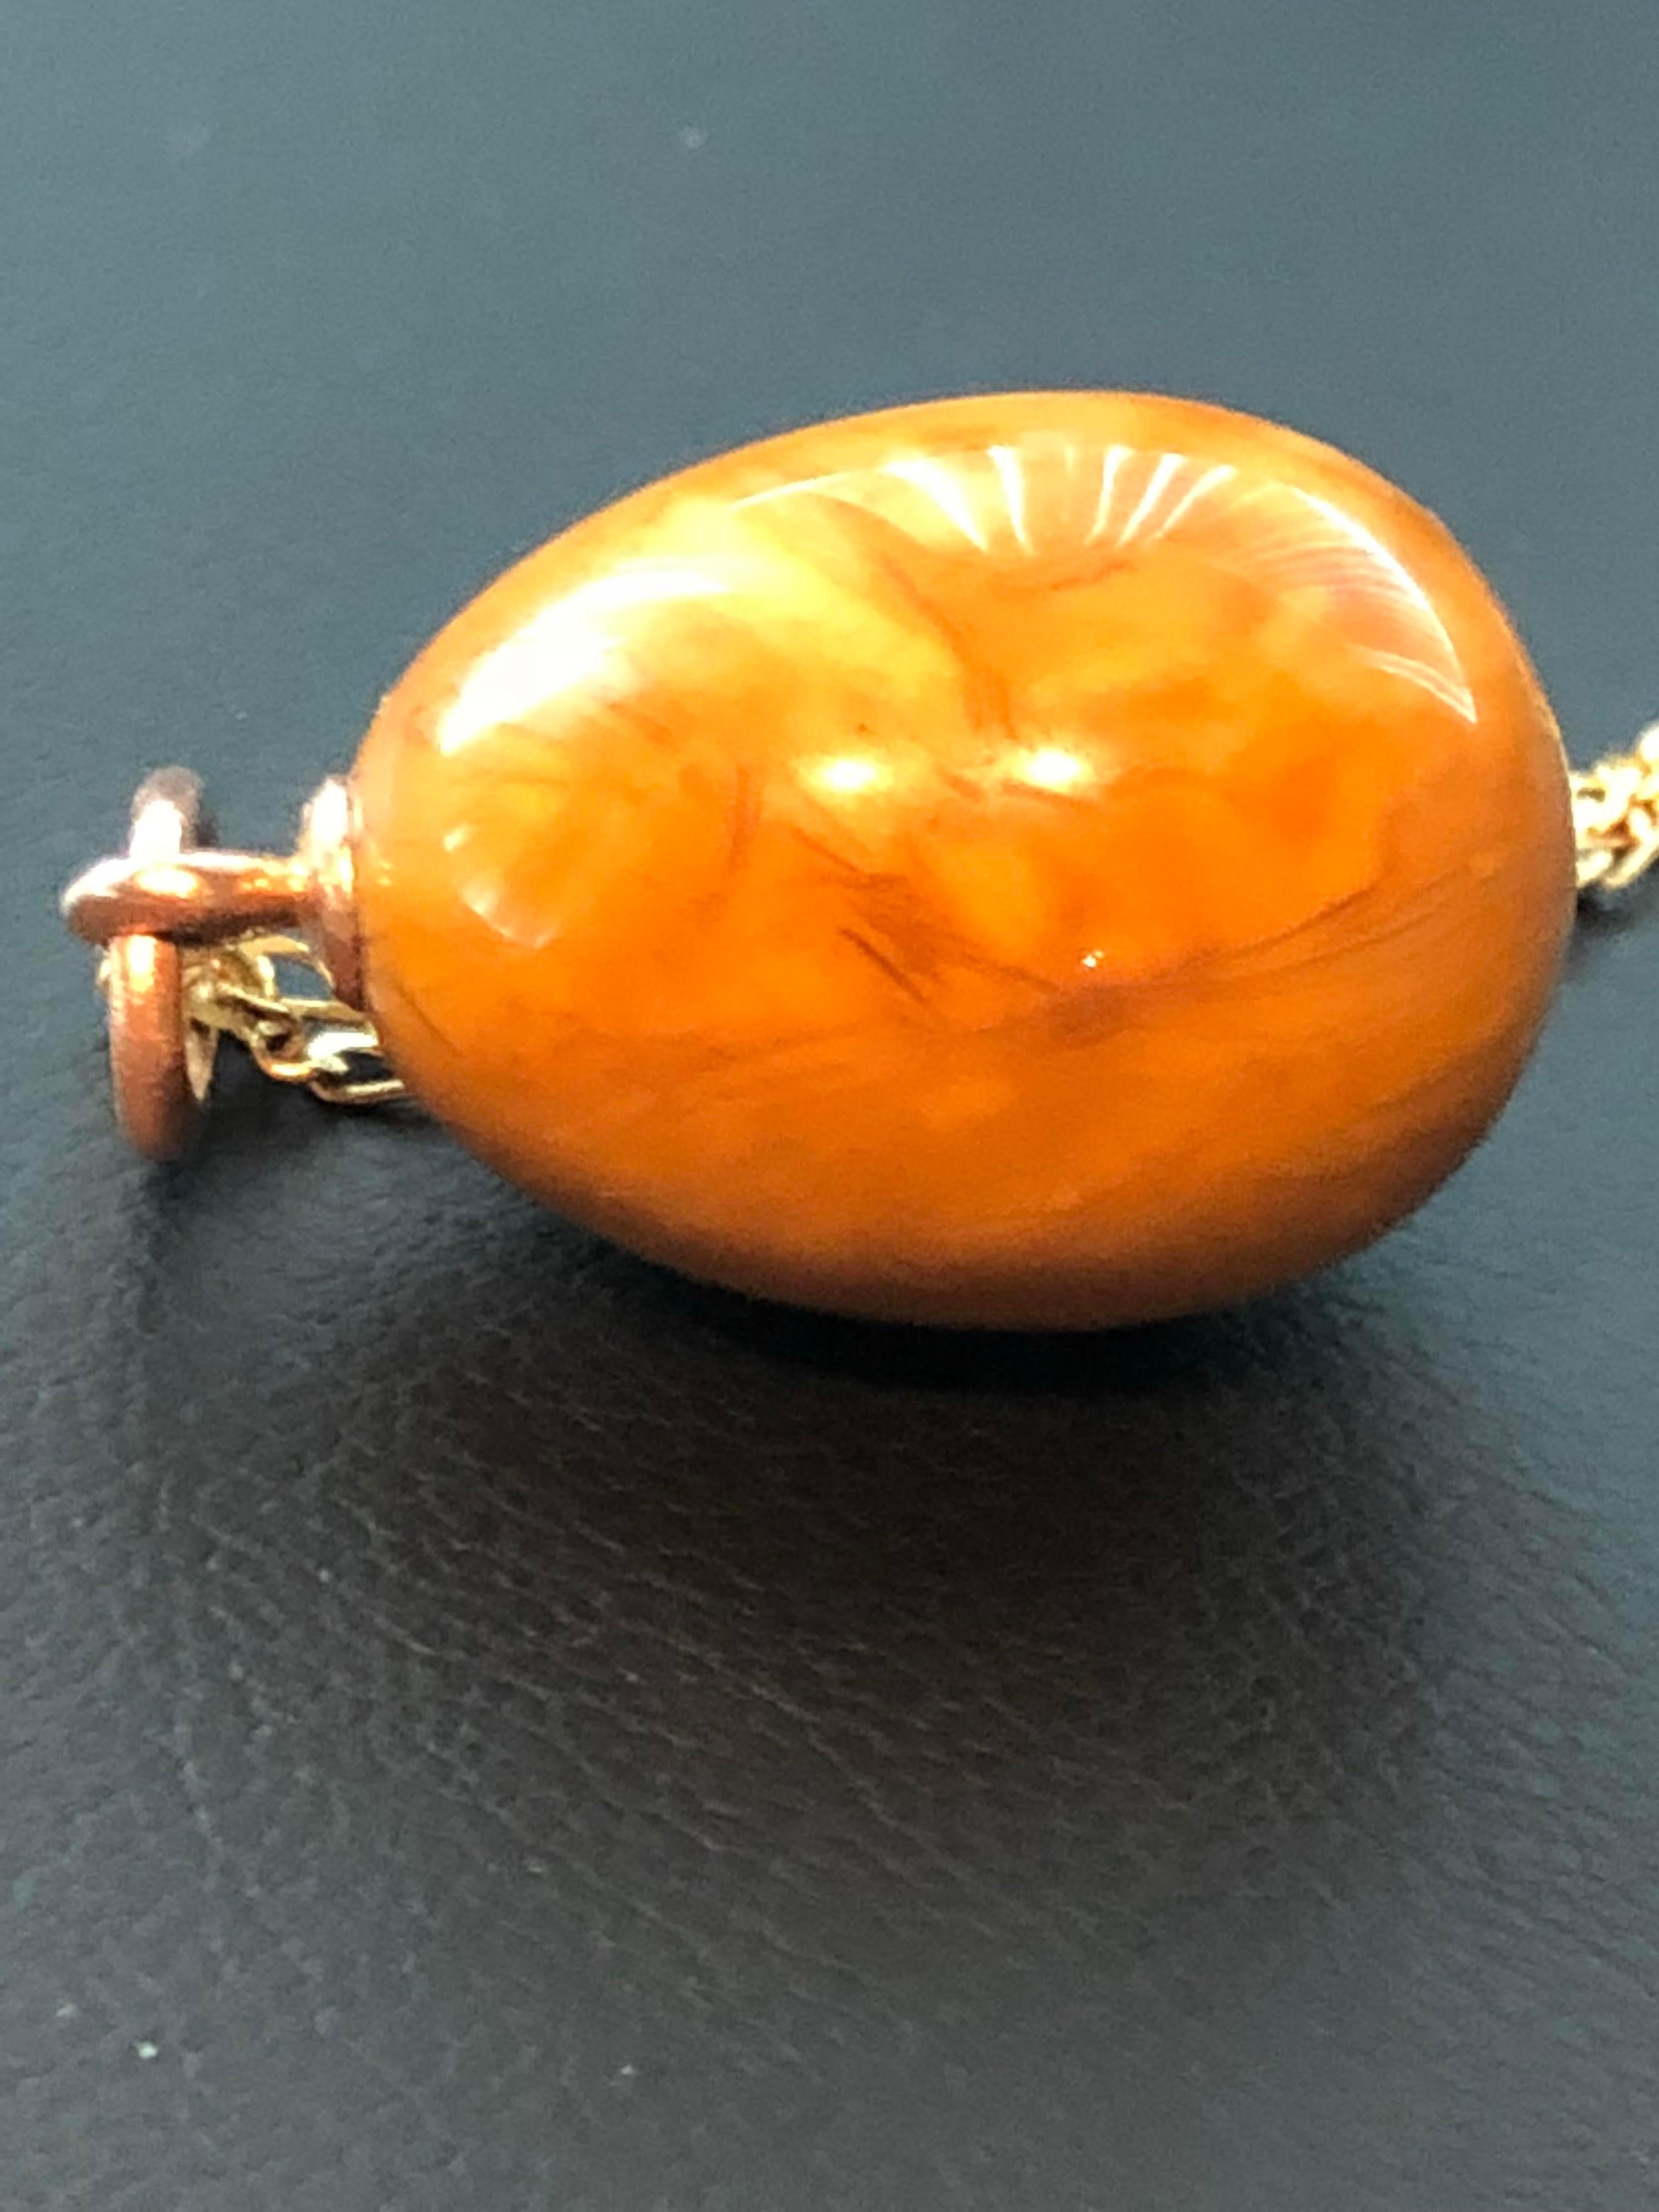 By Faberge

Work Master: Ma
Rare antique fold mounted agate egg pendent by Karl Faberge with work masters mark Karl Faberge

Creator/origin: St.Petersburg, Russia circa early 19th century 1896-1908

Authentic Faberge pieces are super rare and